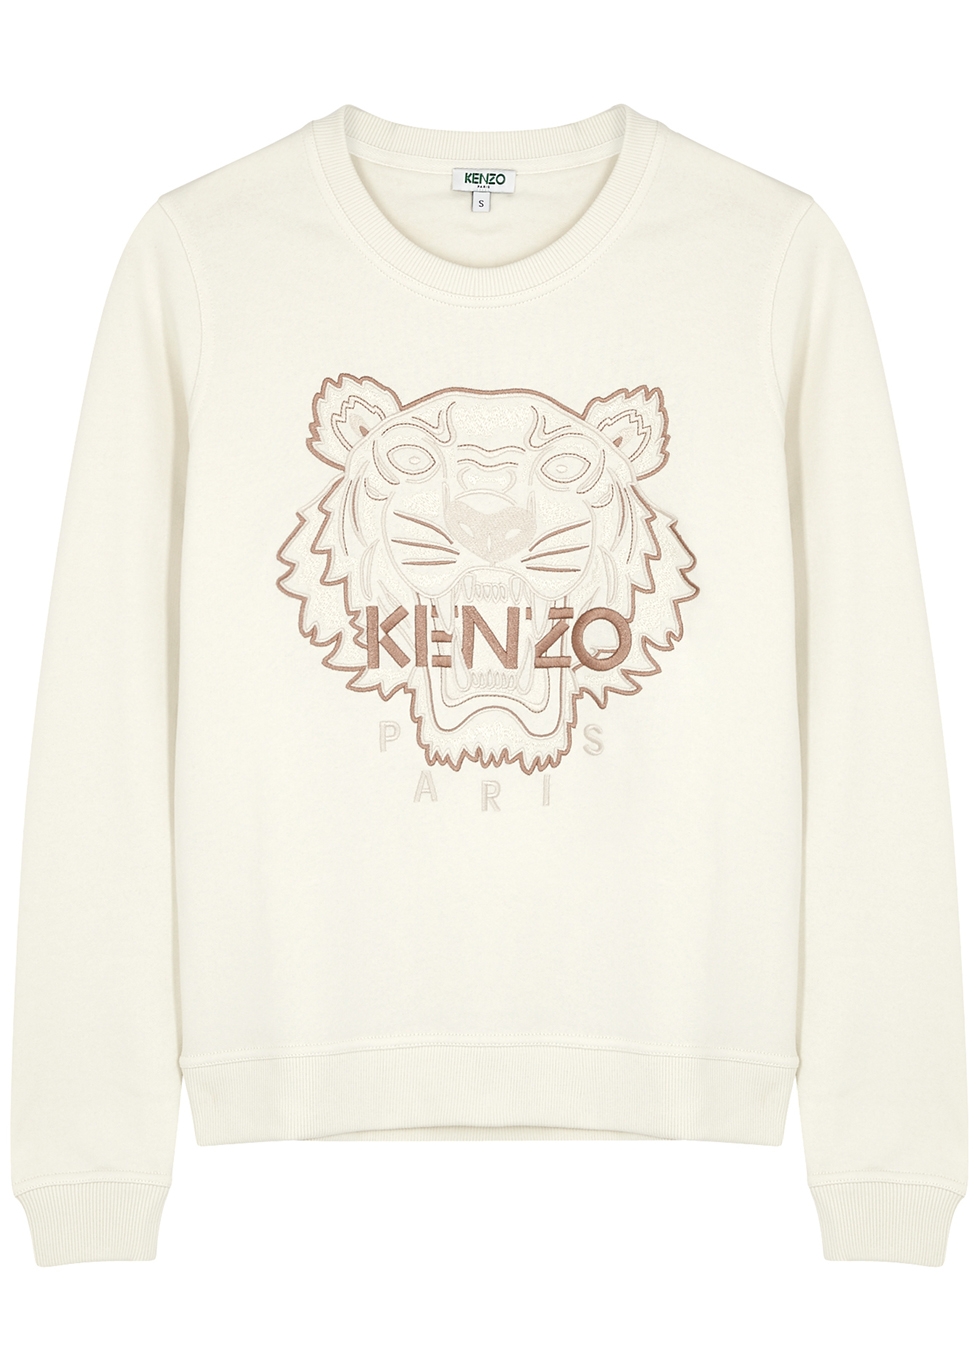 kenzo jumper outfit